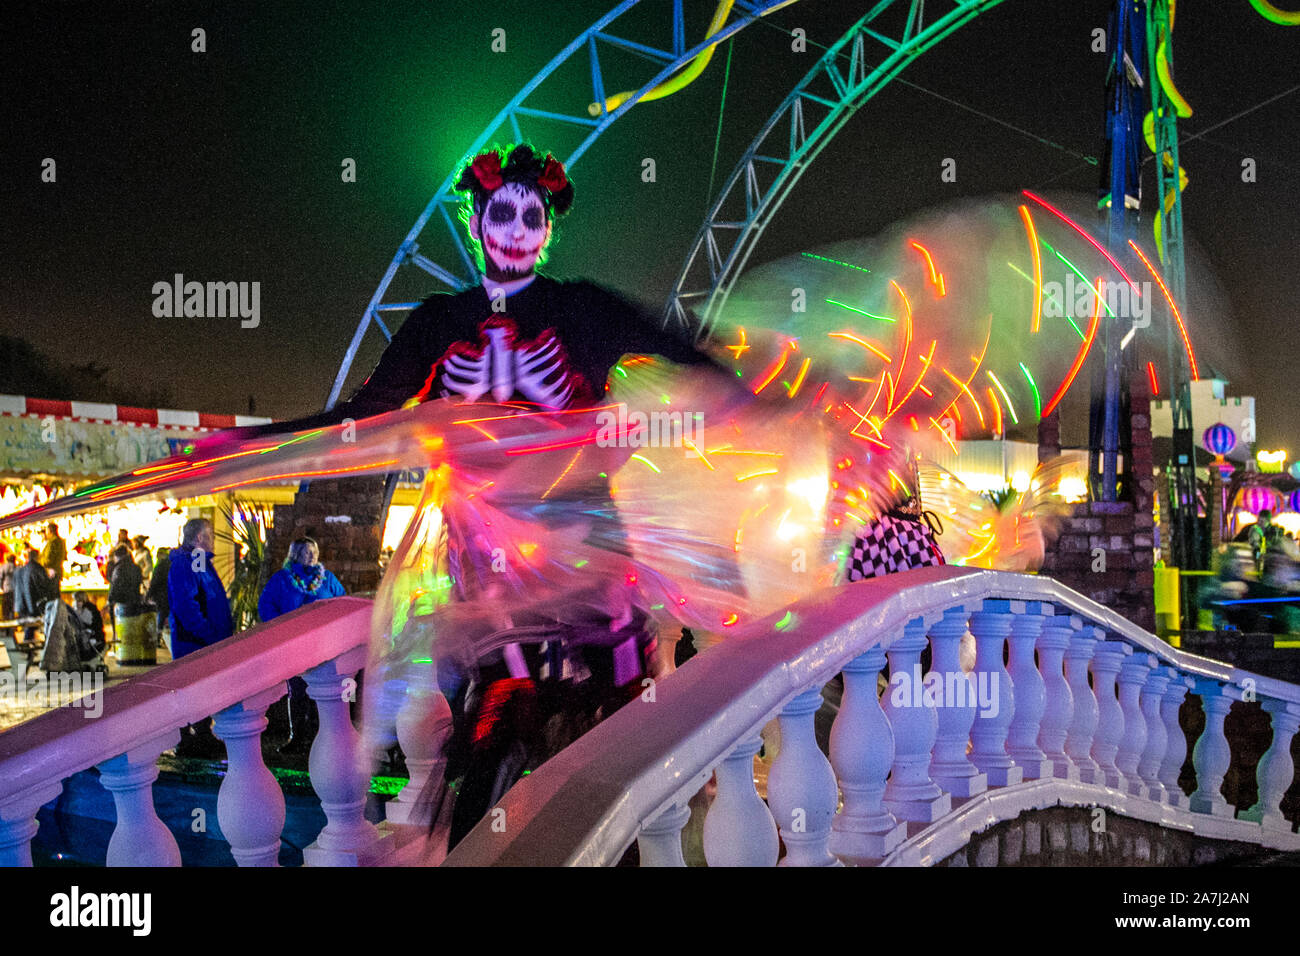 Wings over water LED wispy display elegant skeletal figure at the Day Of The Dead Festival – November the host month to Mexico's Day of the Dead. Southport Pleasureland staged its own twist on the spooky Mexican celebration with explosive cascade of colours and patterns created while dancing moving with light, bright, digital, loop design, motion, pattern and vibrant revelry in a feast for the senses.  A host of fantastic entertainment & celebrations brought thousands of tourists to the resort to enjoy the spectacle. Stock Photo